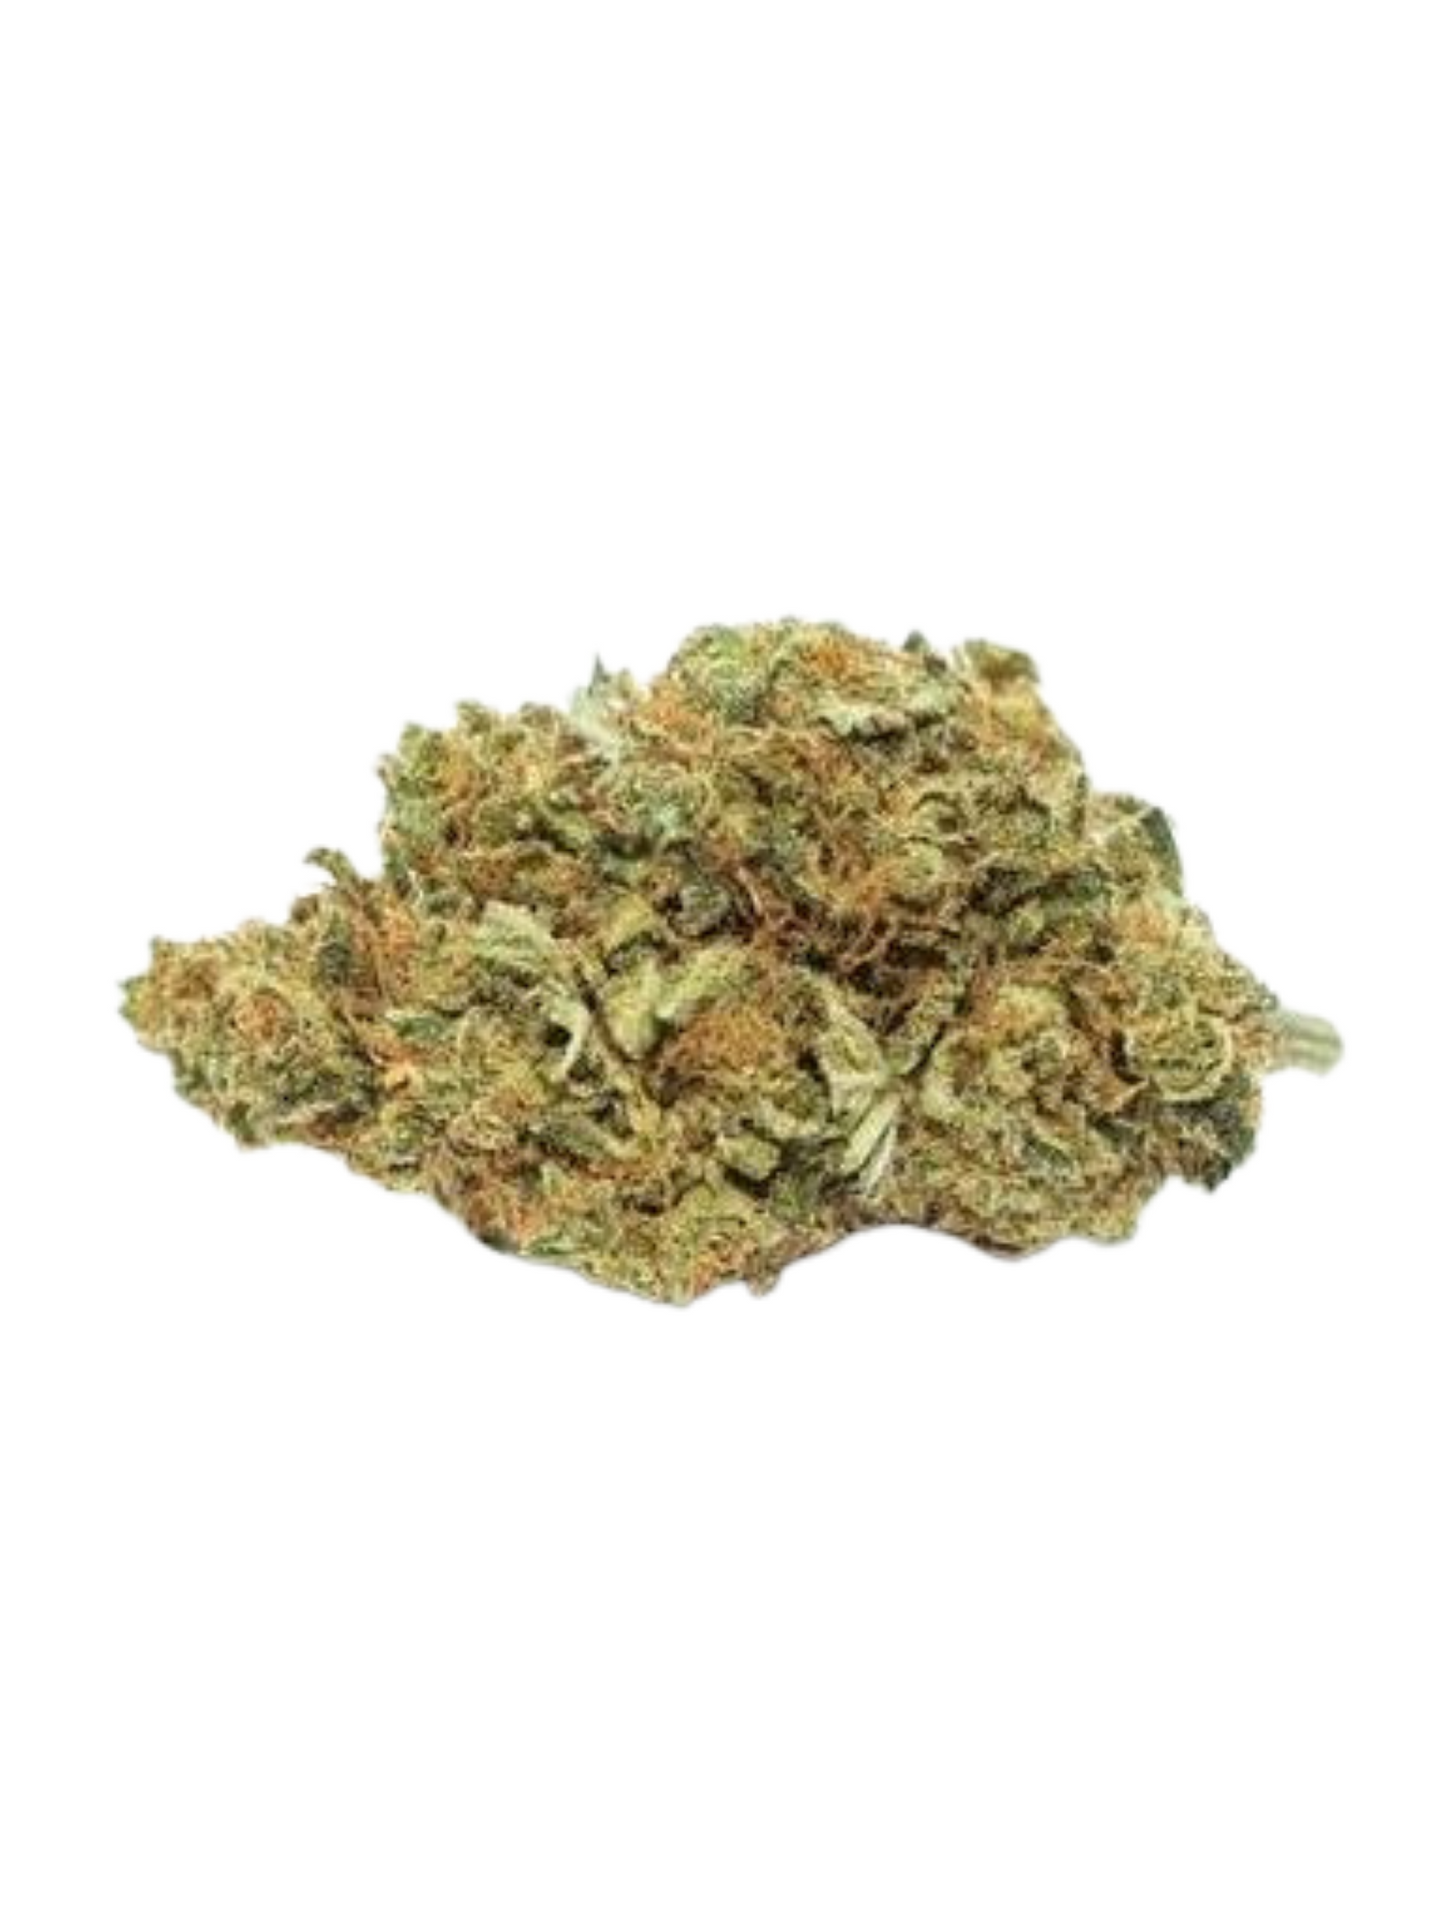 Exclusive Reserve - NYC Diesel (5G for $60)